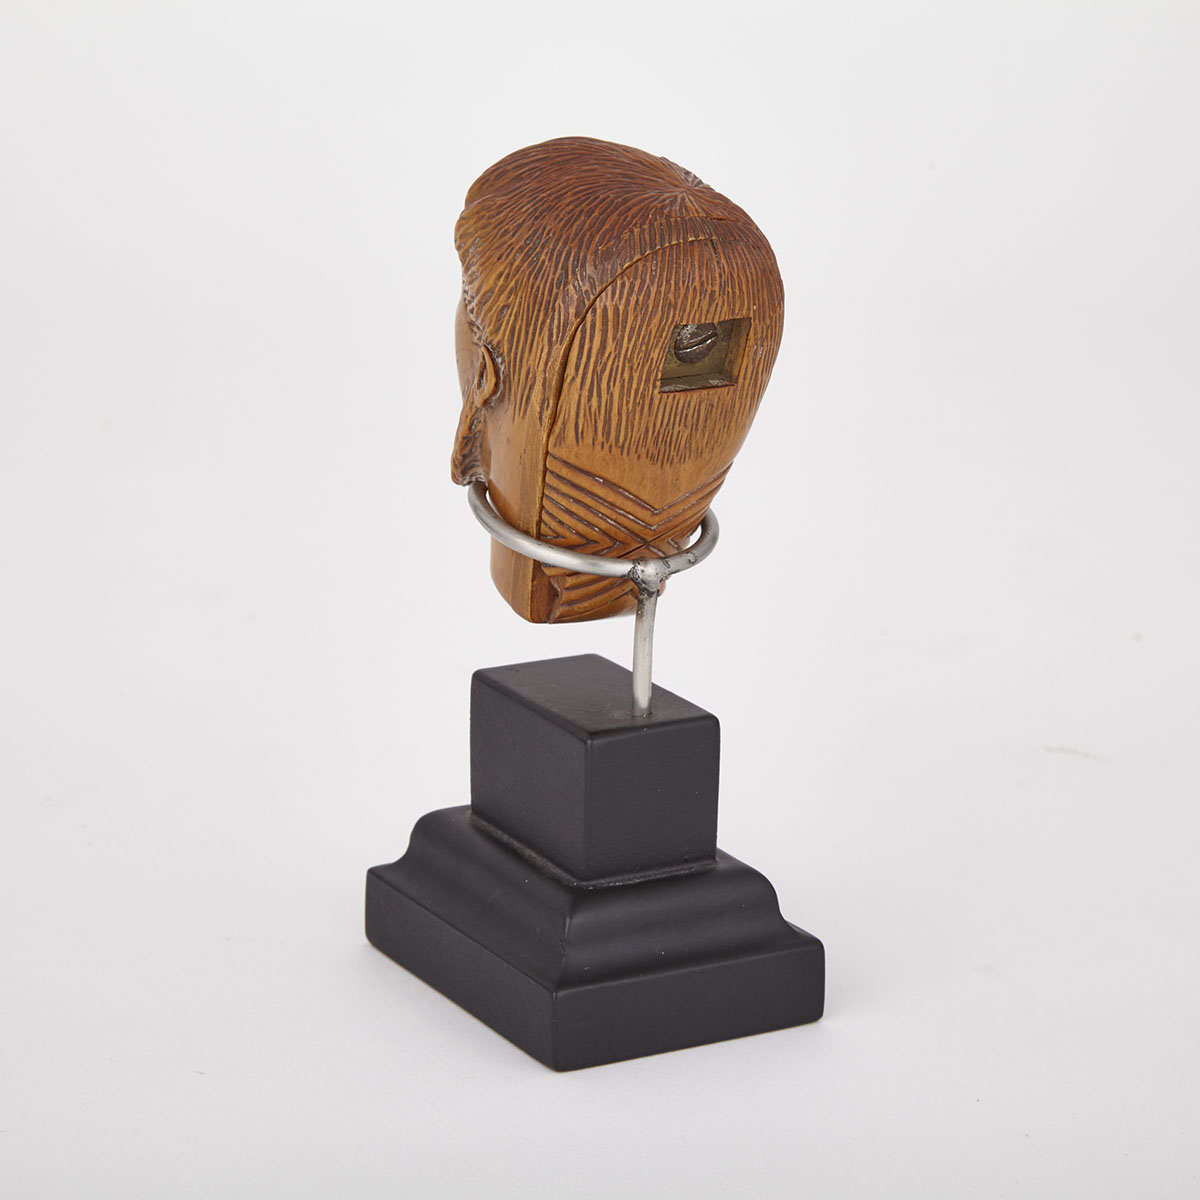 English Carved Boxwood Head Form Puzzle Snuff Box, early 19th century